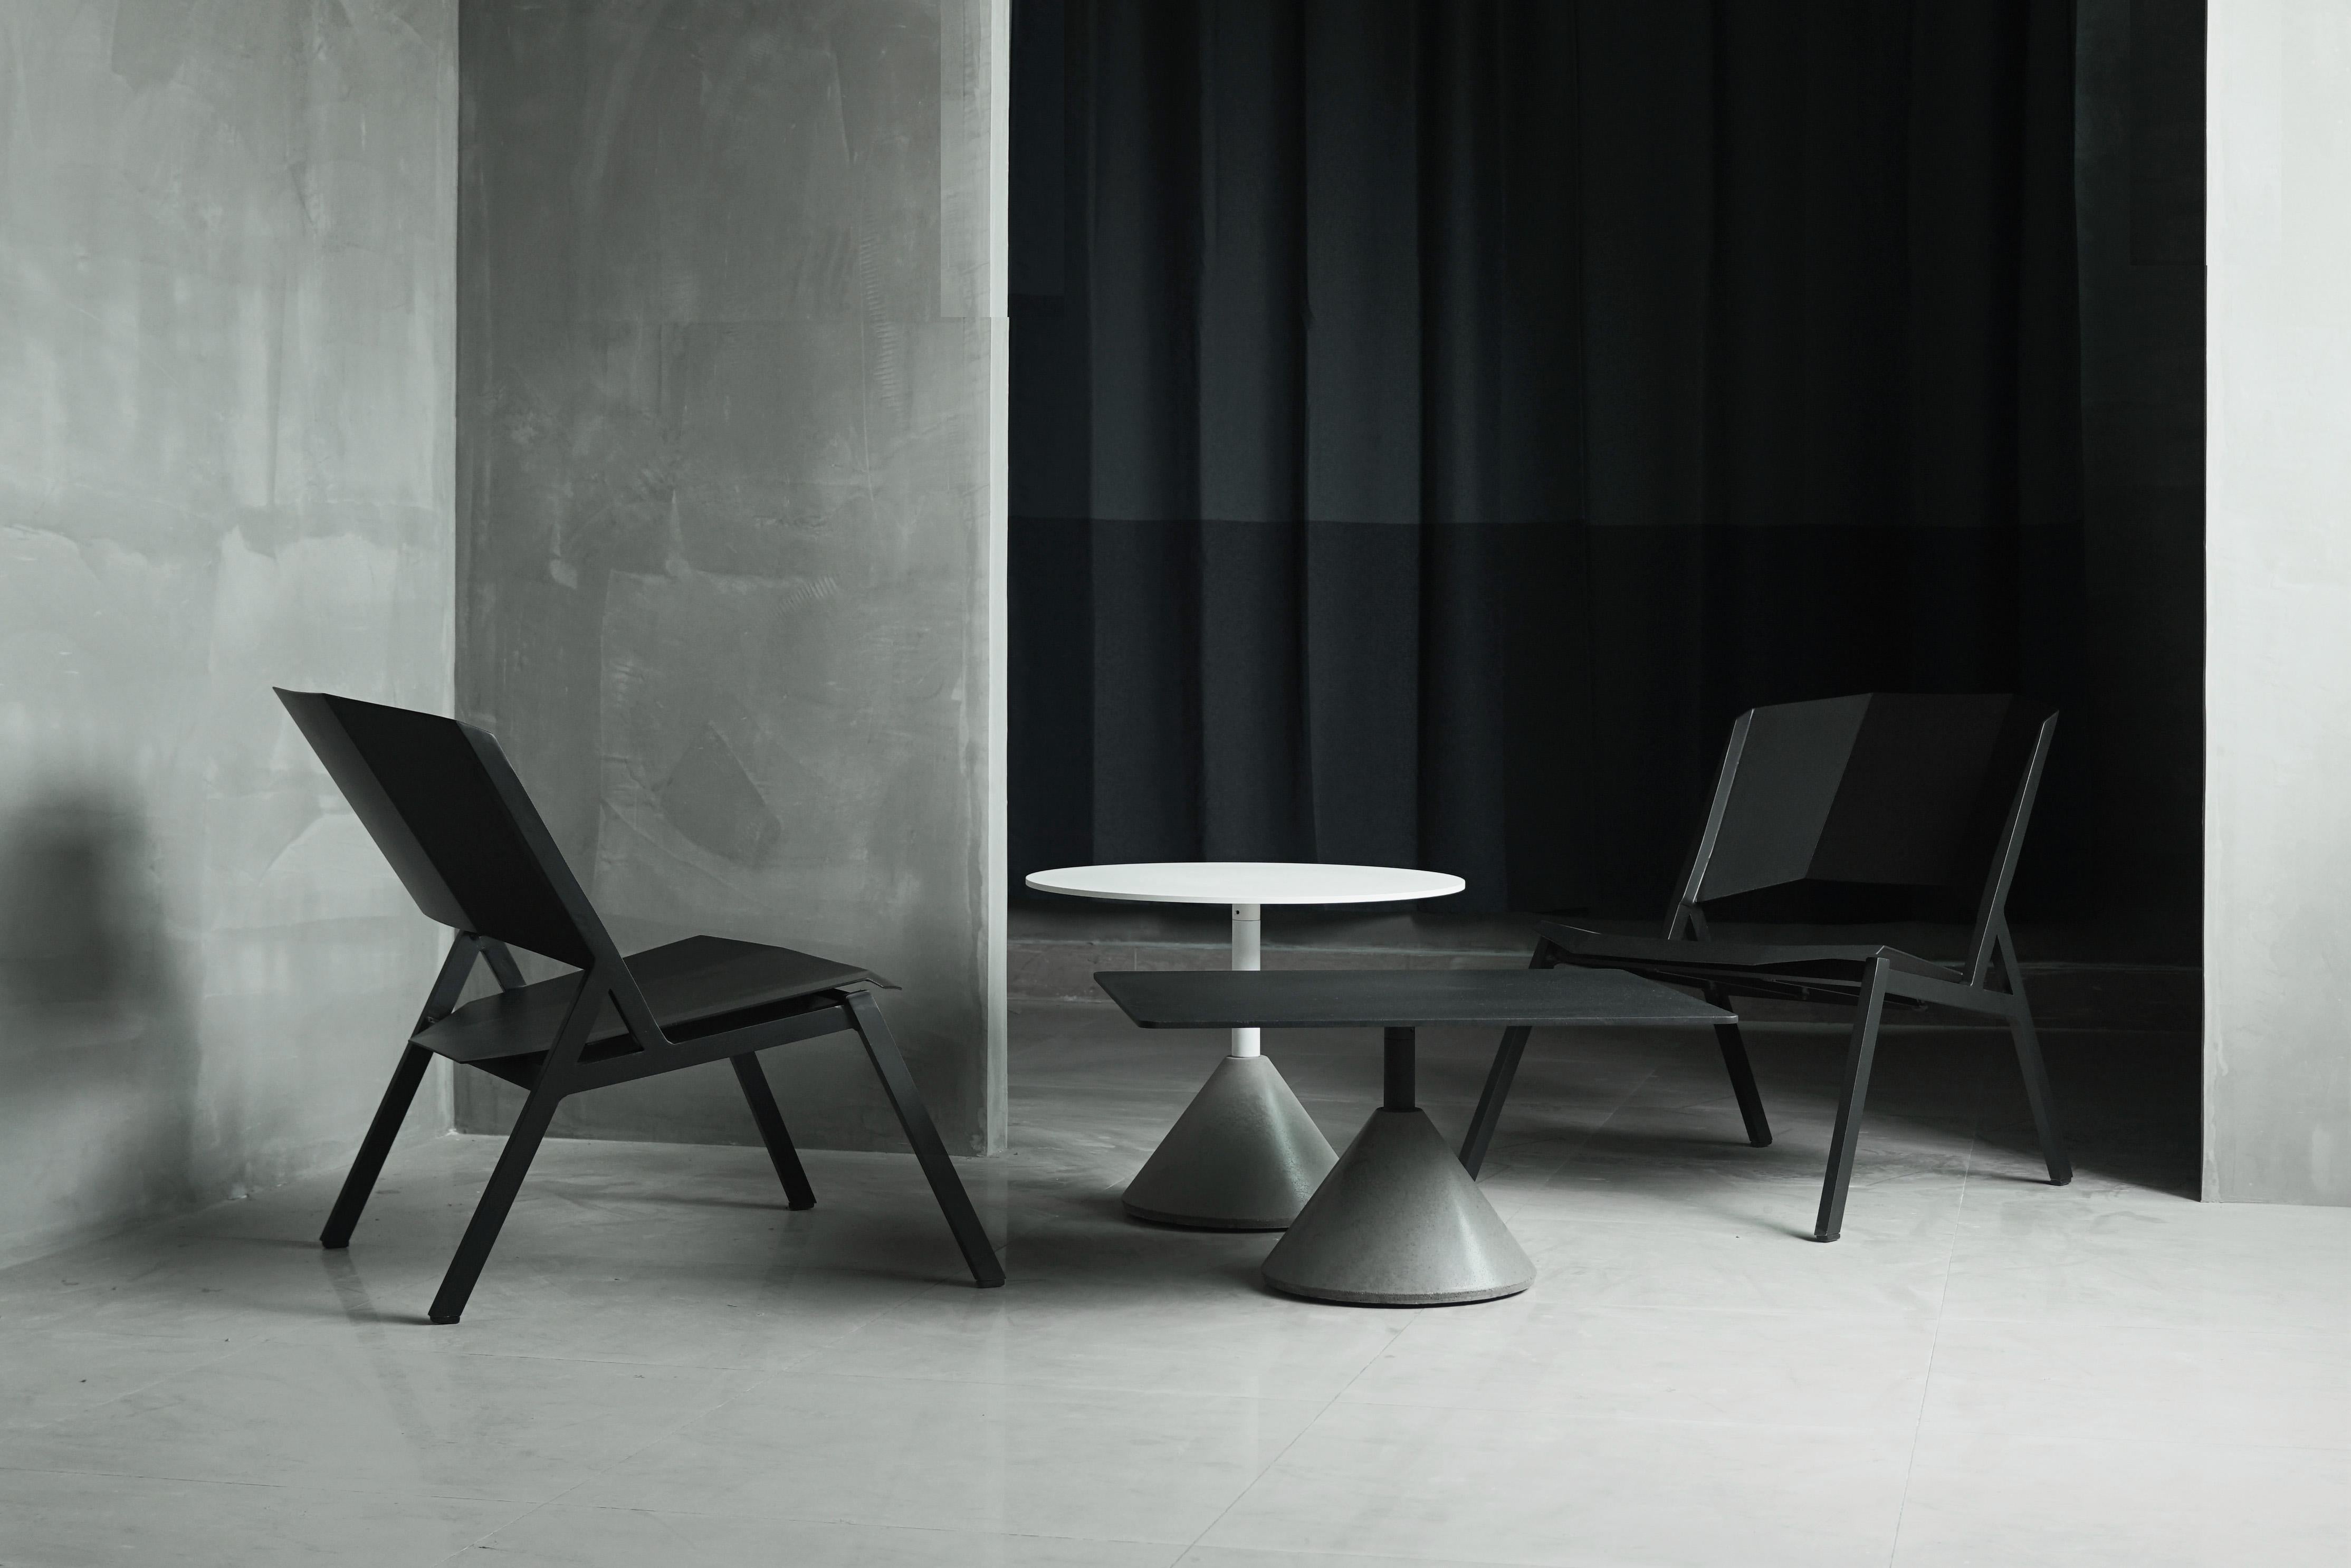 Material: Concrete, aluminum, demolition leftover concrete
Size: 600 x 700 x H350 mm
Weight: 28 kg
Color: Cement grey
Tabletop color: Black

About the Artist/ Designer:
Bentu's furniture derives its uniqueness from the simplicity of its forms